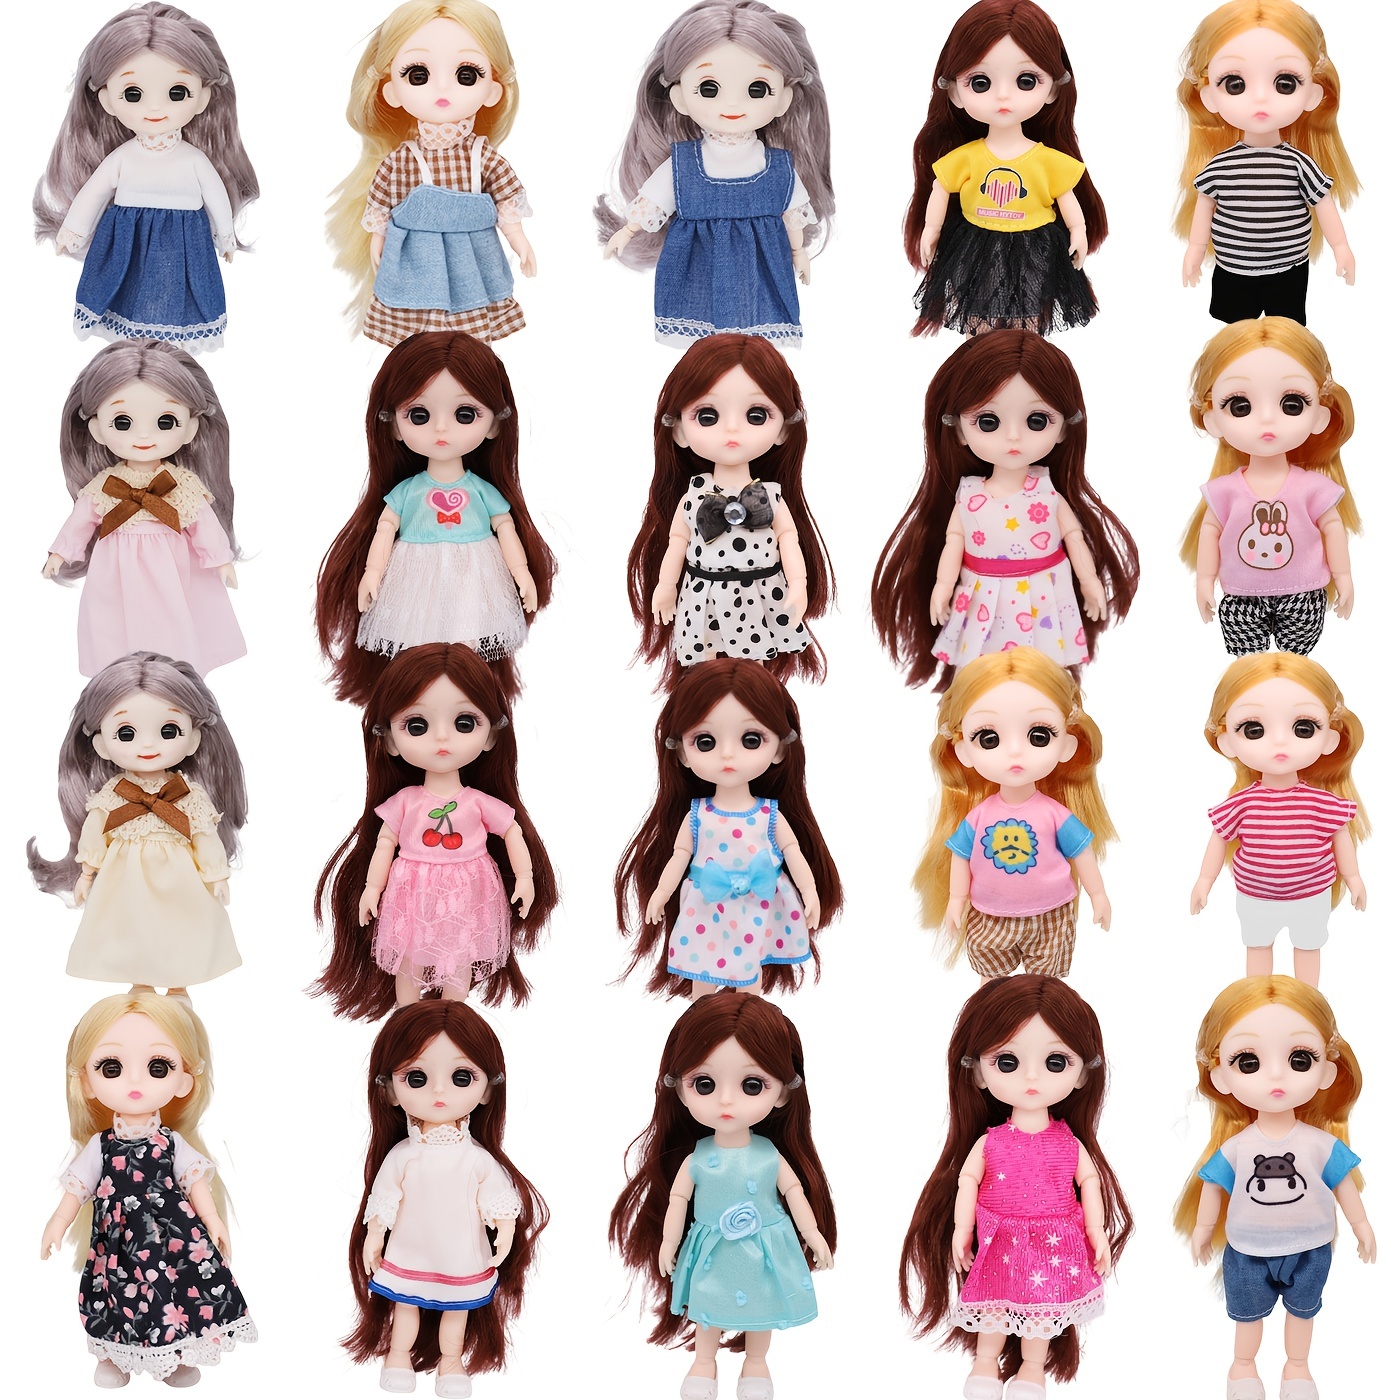  16 Pcs Girl Doll Clothes Lovely Outfits Mini Doll